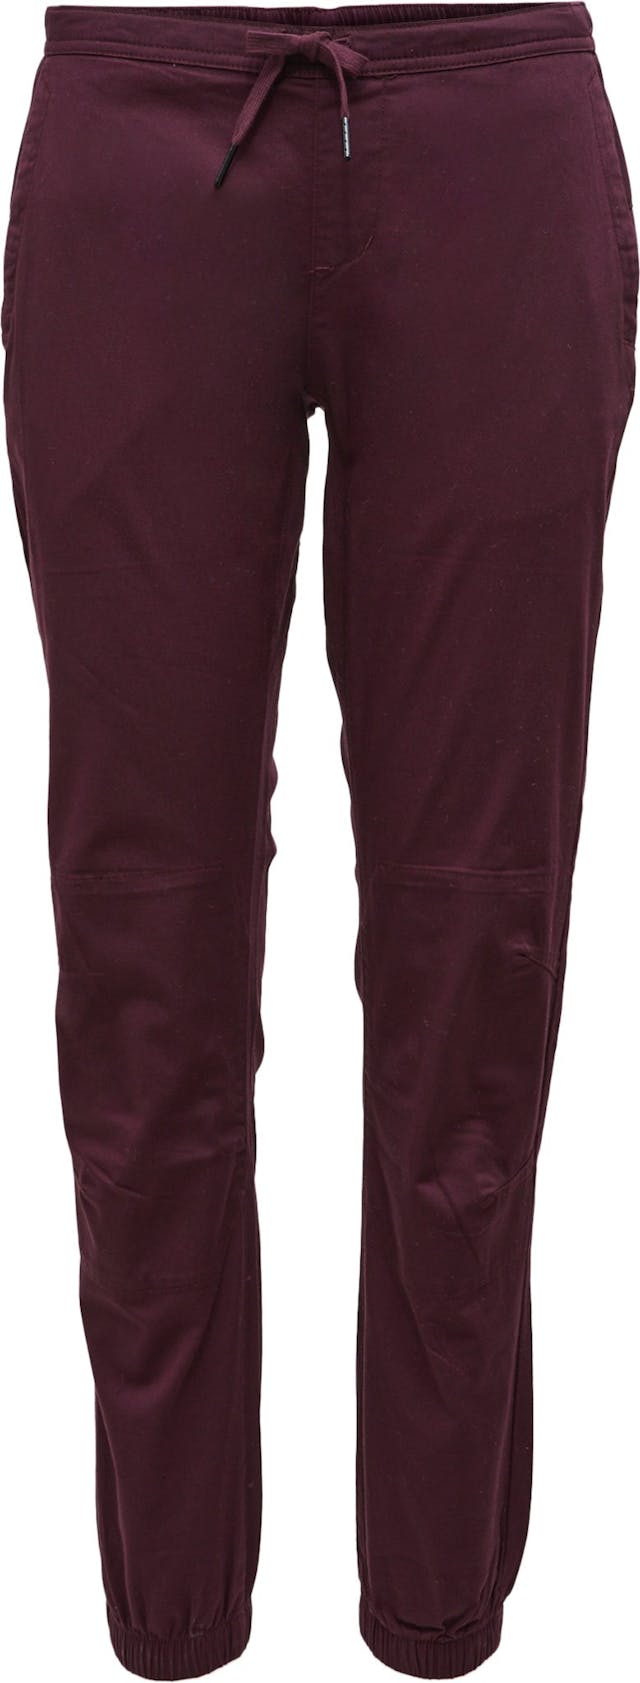 Product image for Notion Pant - Women's